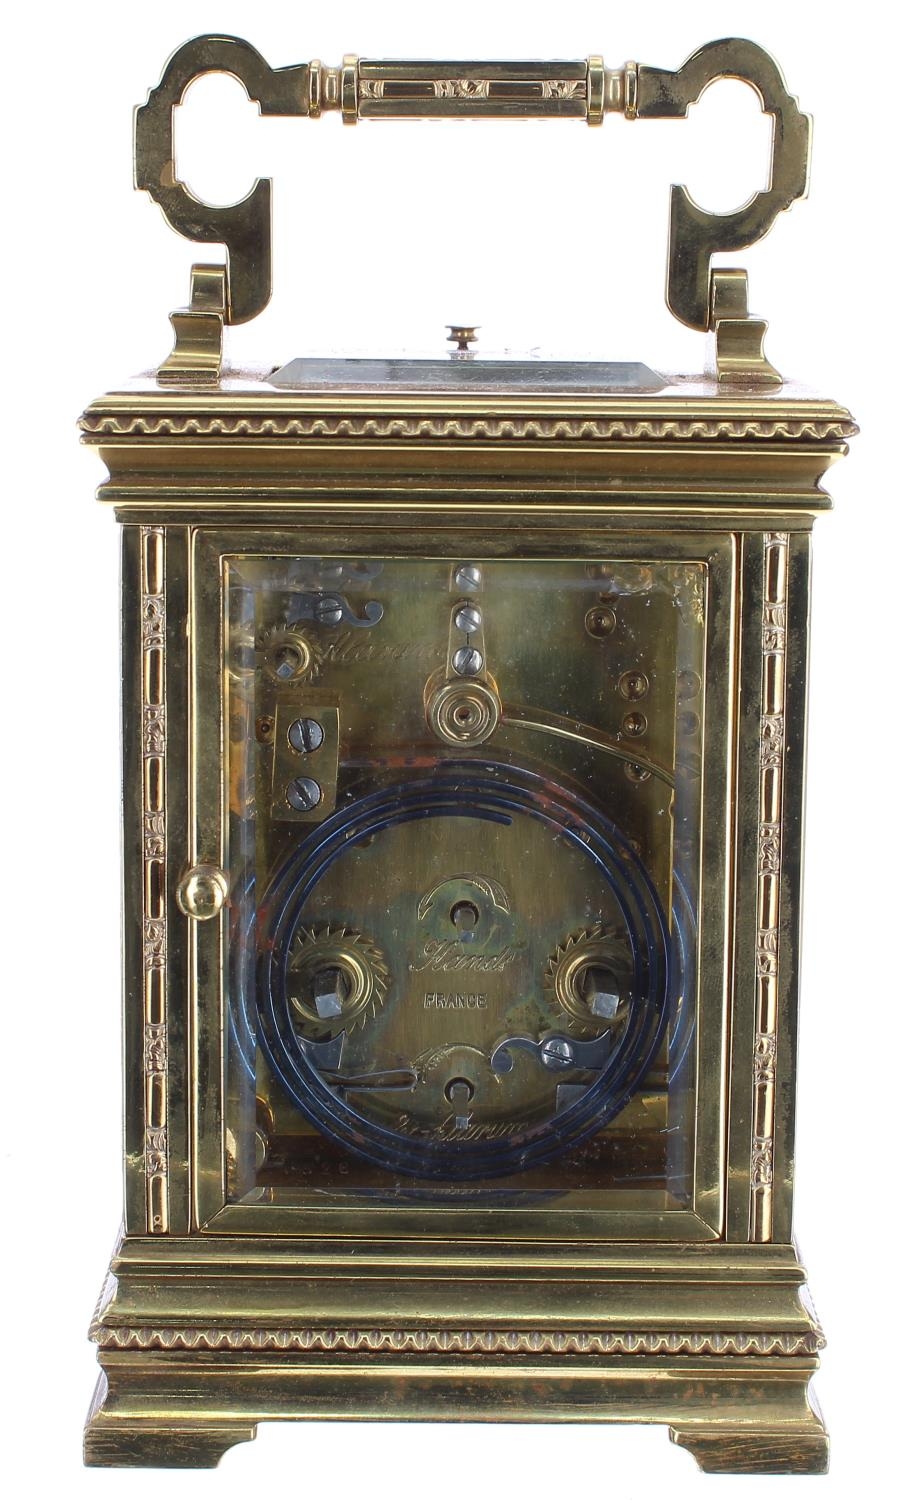 Good French repeater carriage clock with alarm, the movement stamped France no. 4526 and striking on - Image 4 of 5